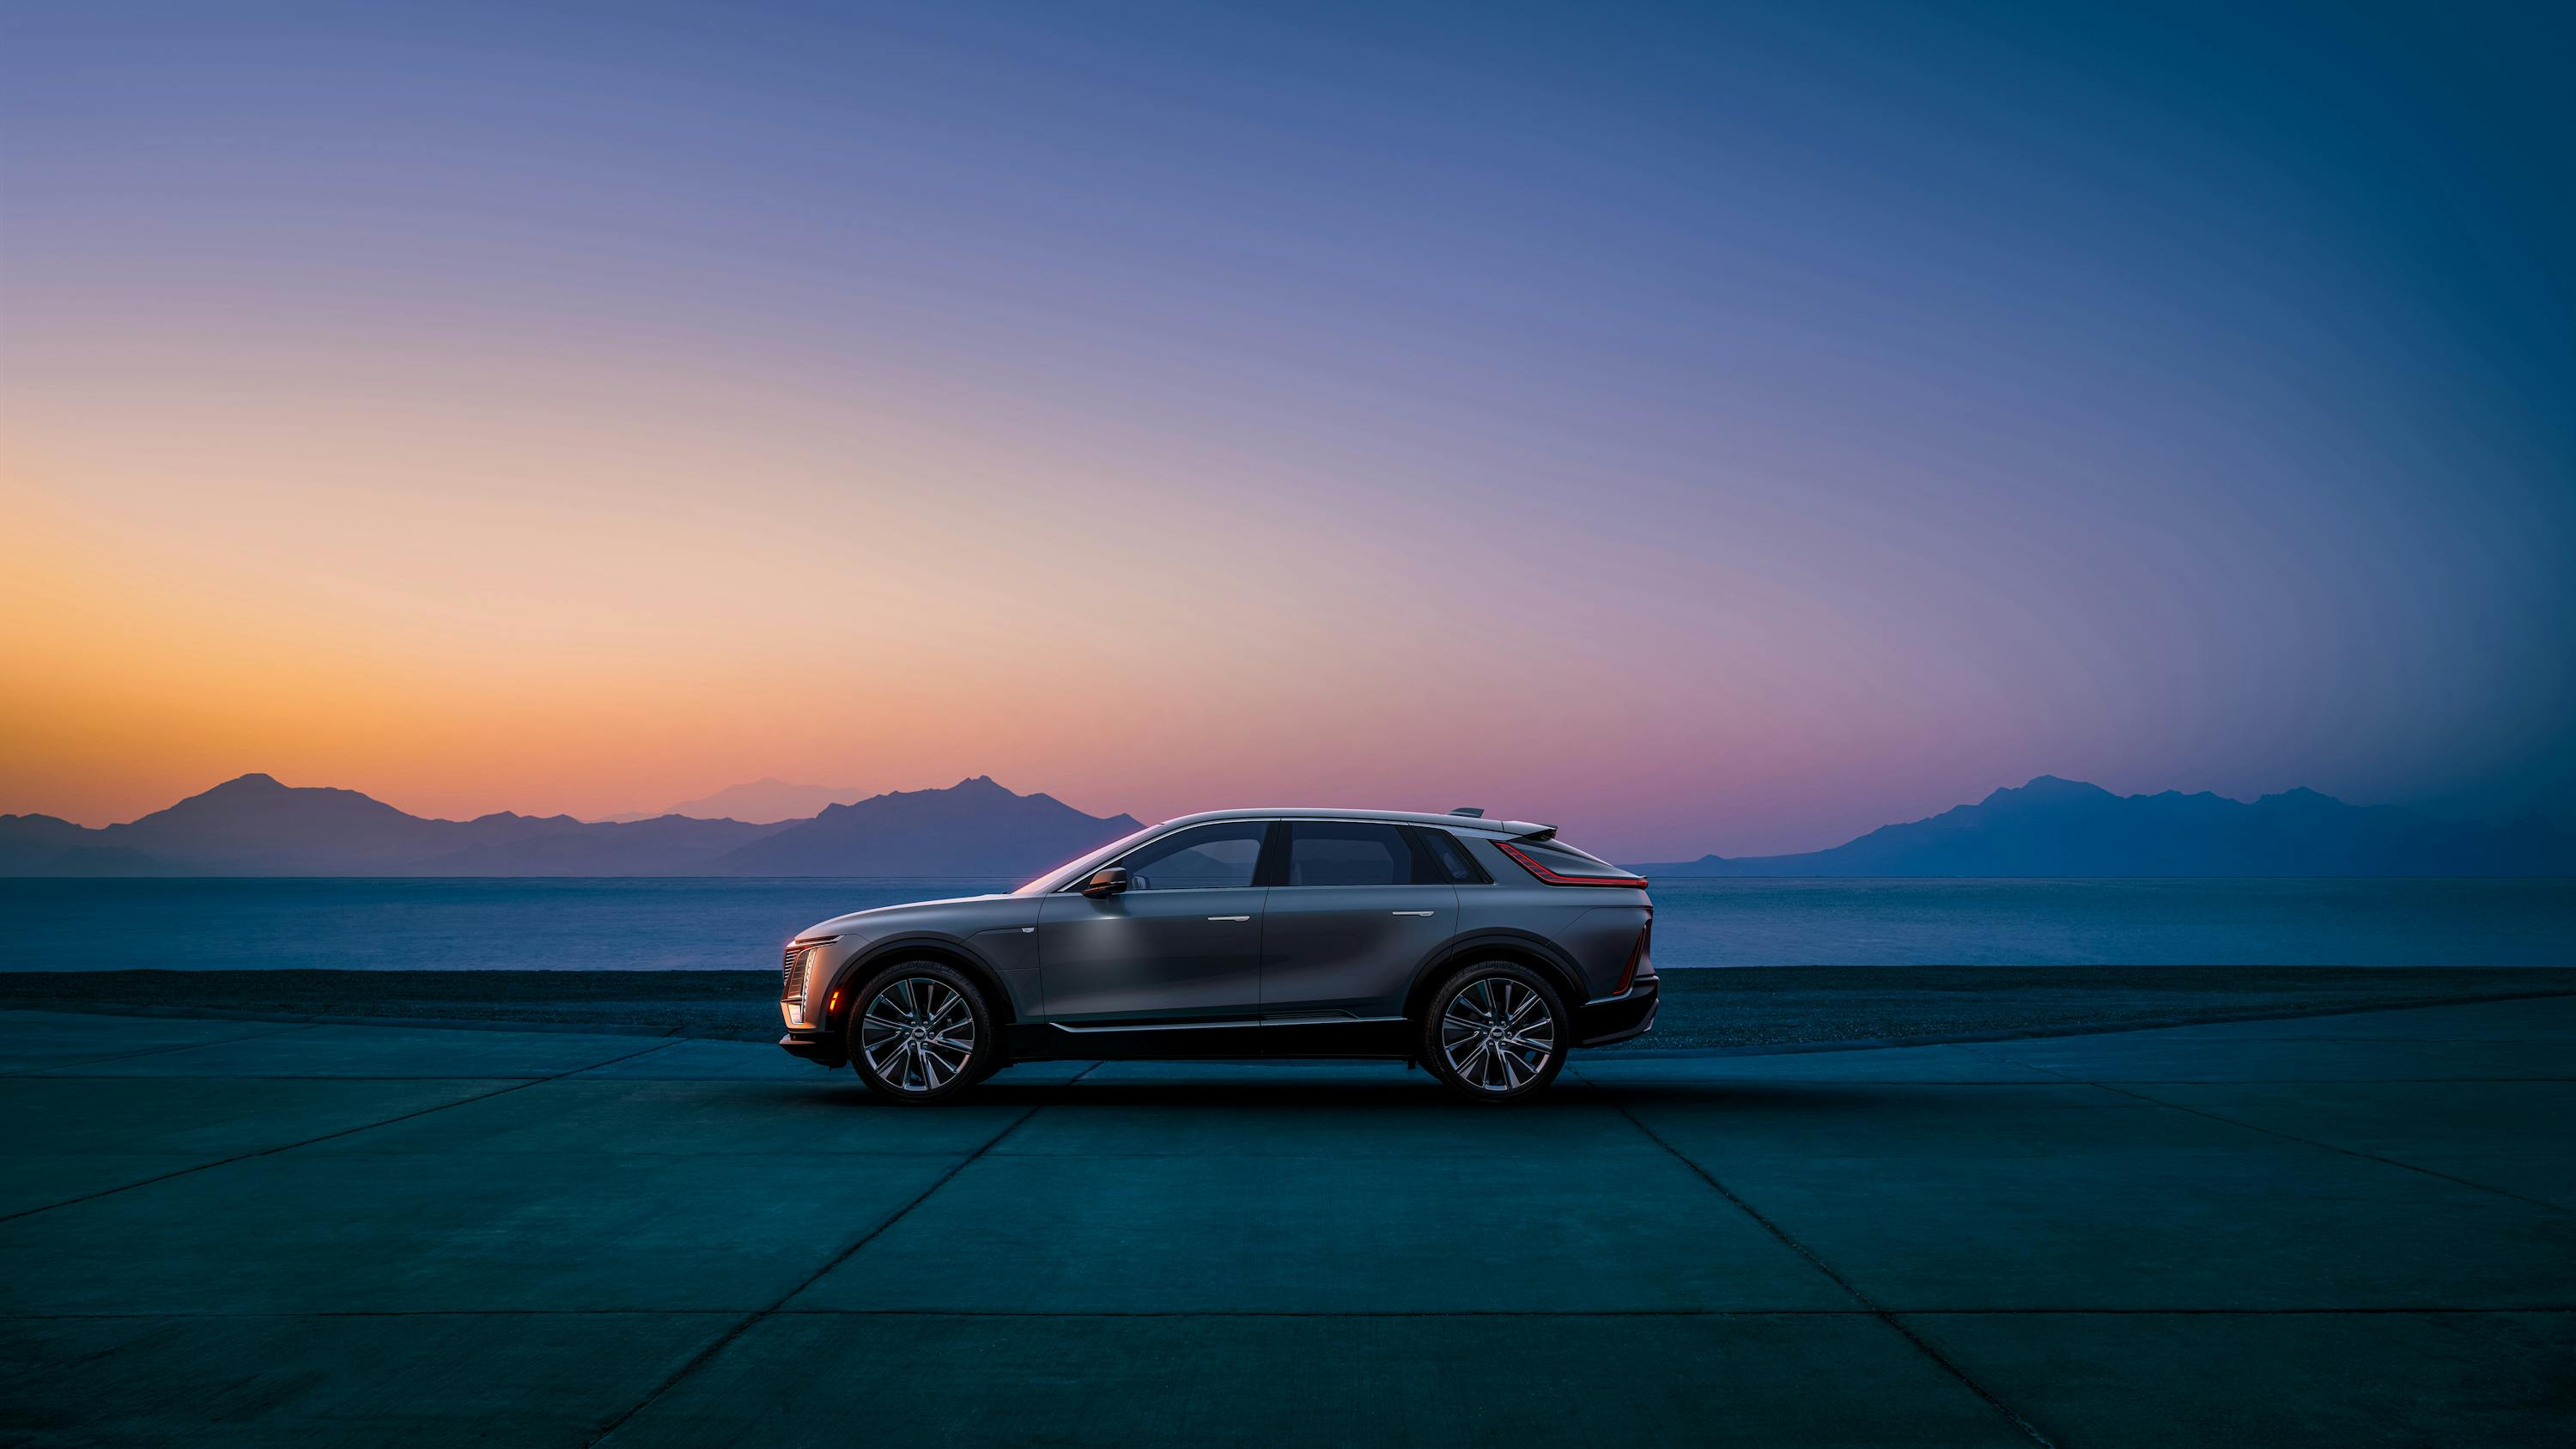 A Cadillac SUV in front of a sunset with mountains in the distance